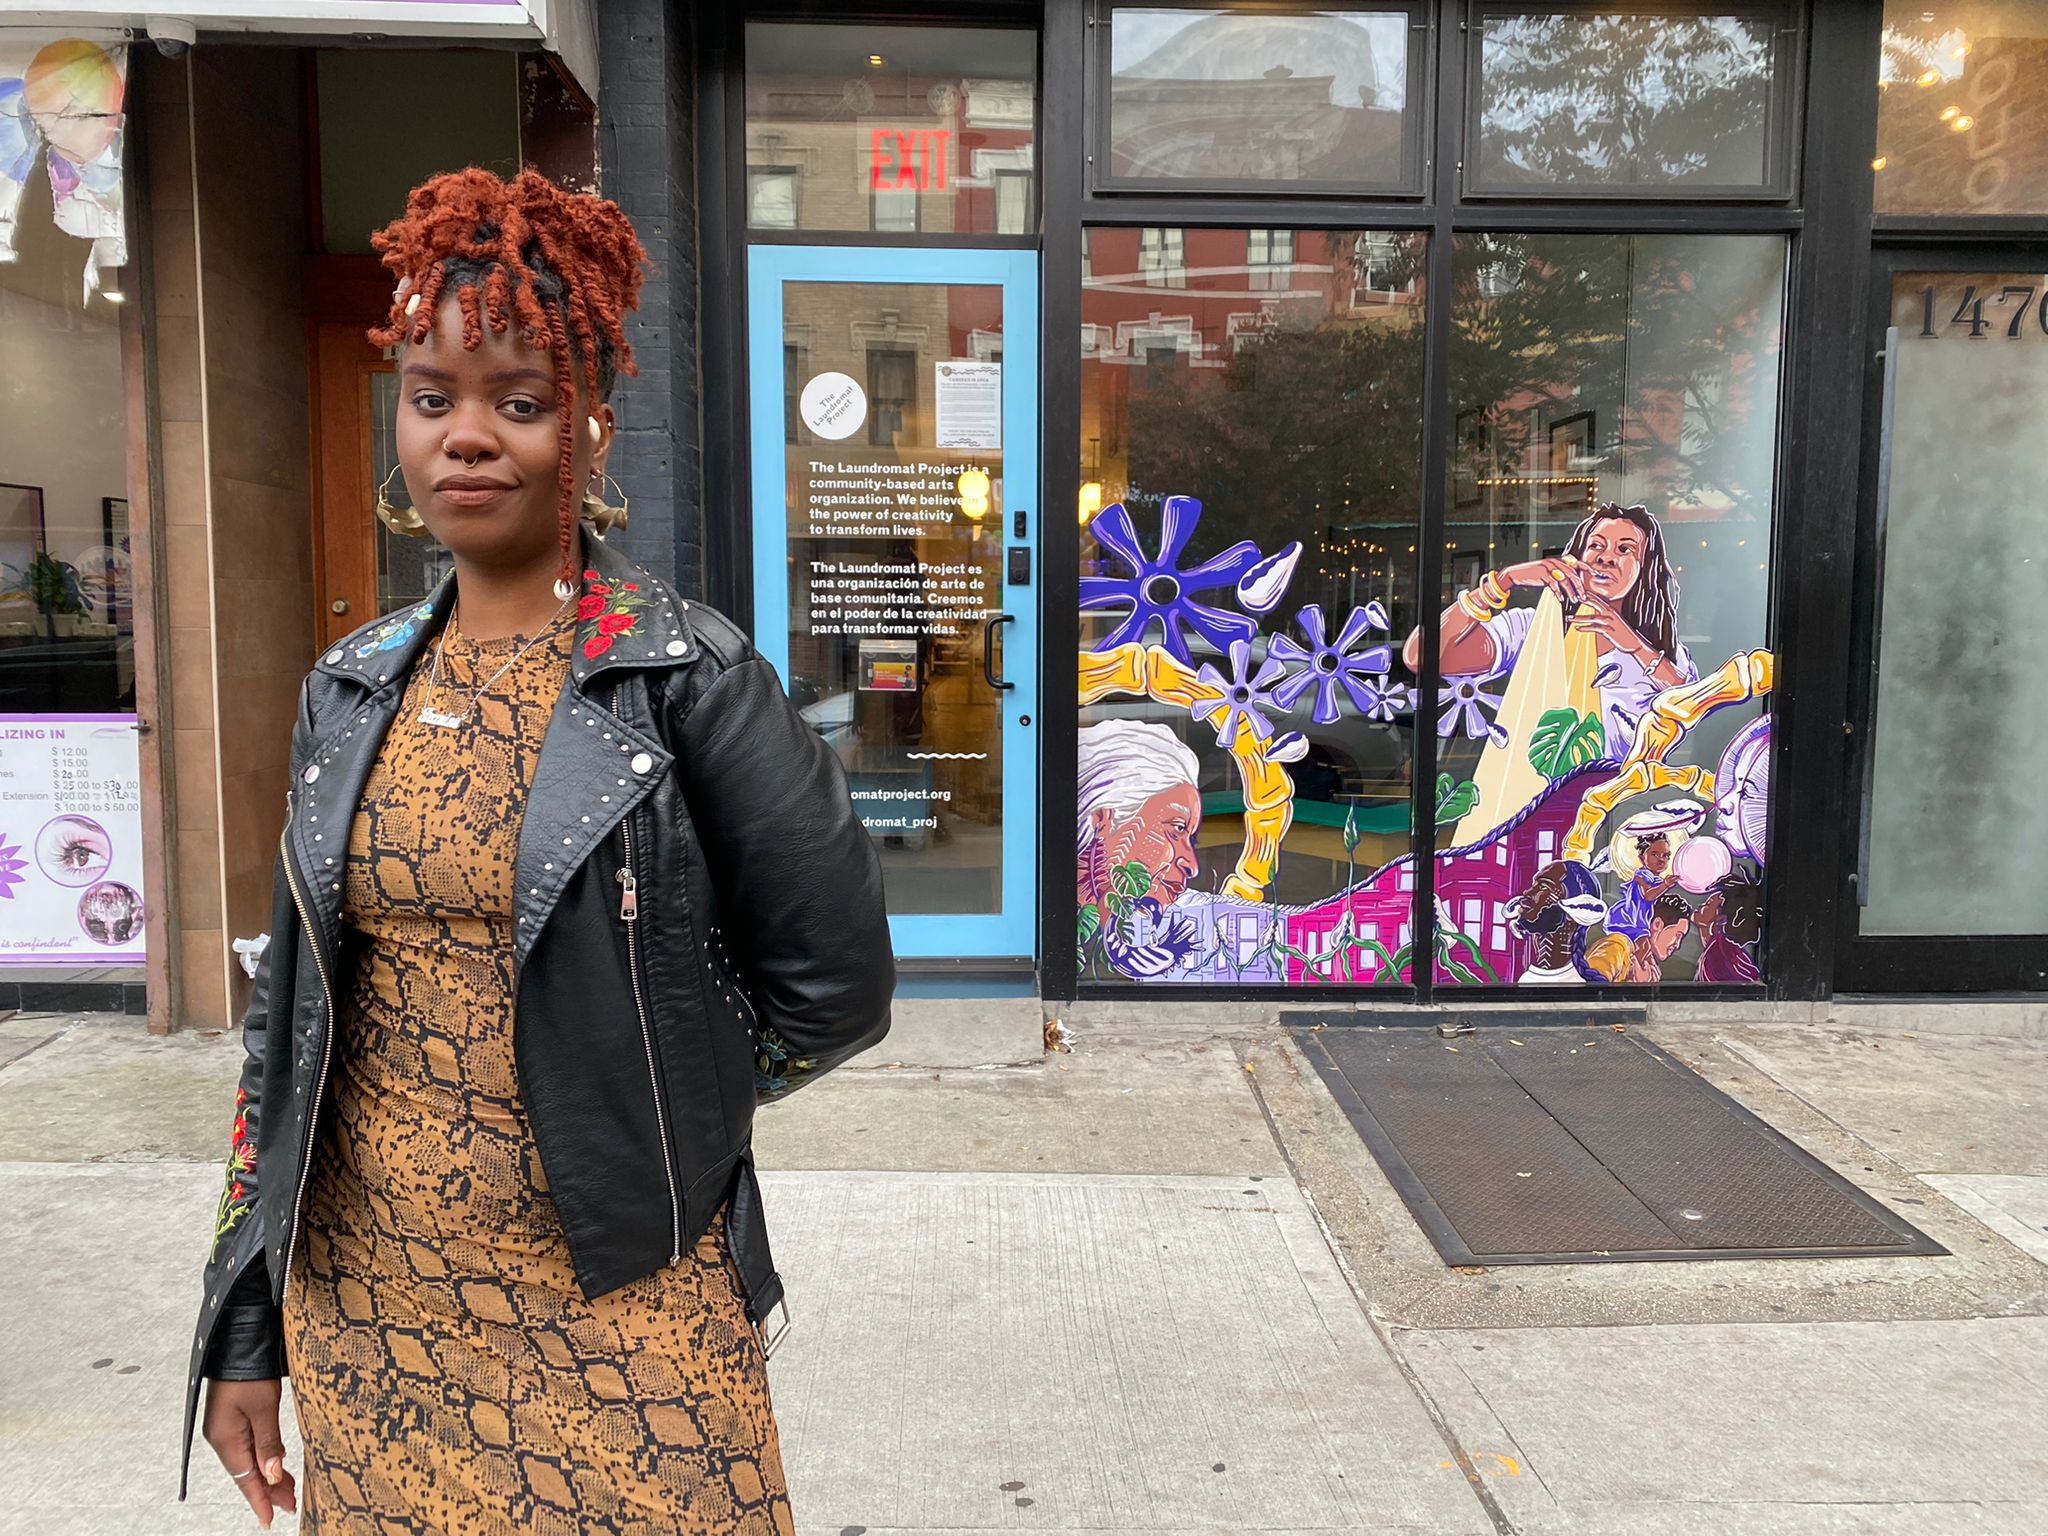 Artist Jazmine Hayes stands, confident, in front of The Laundromat Project storefront on Fulton Street. Her artwork is in the background.